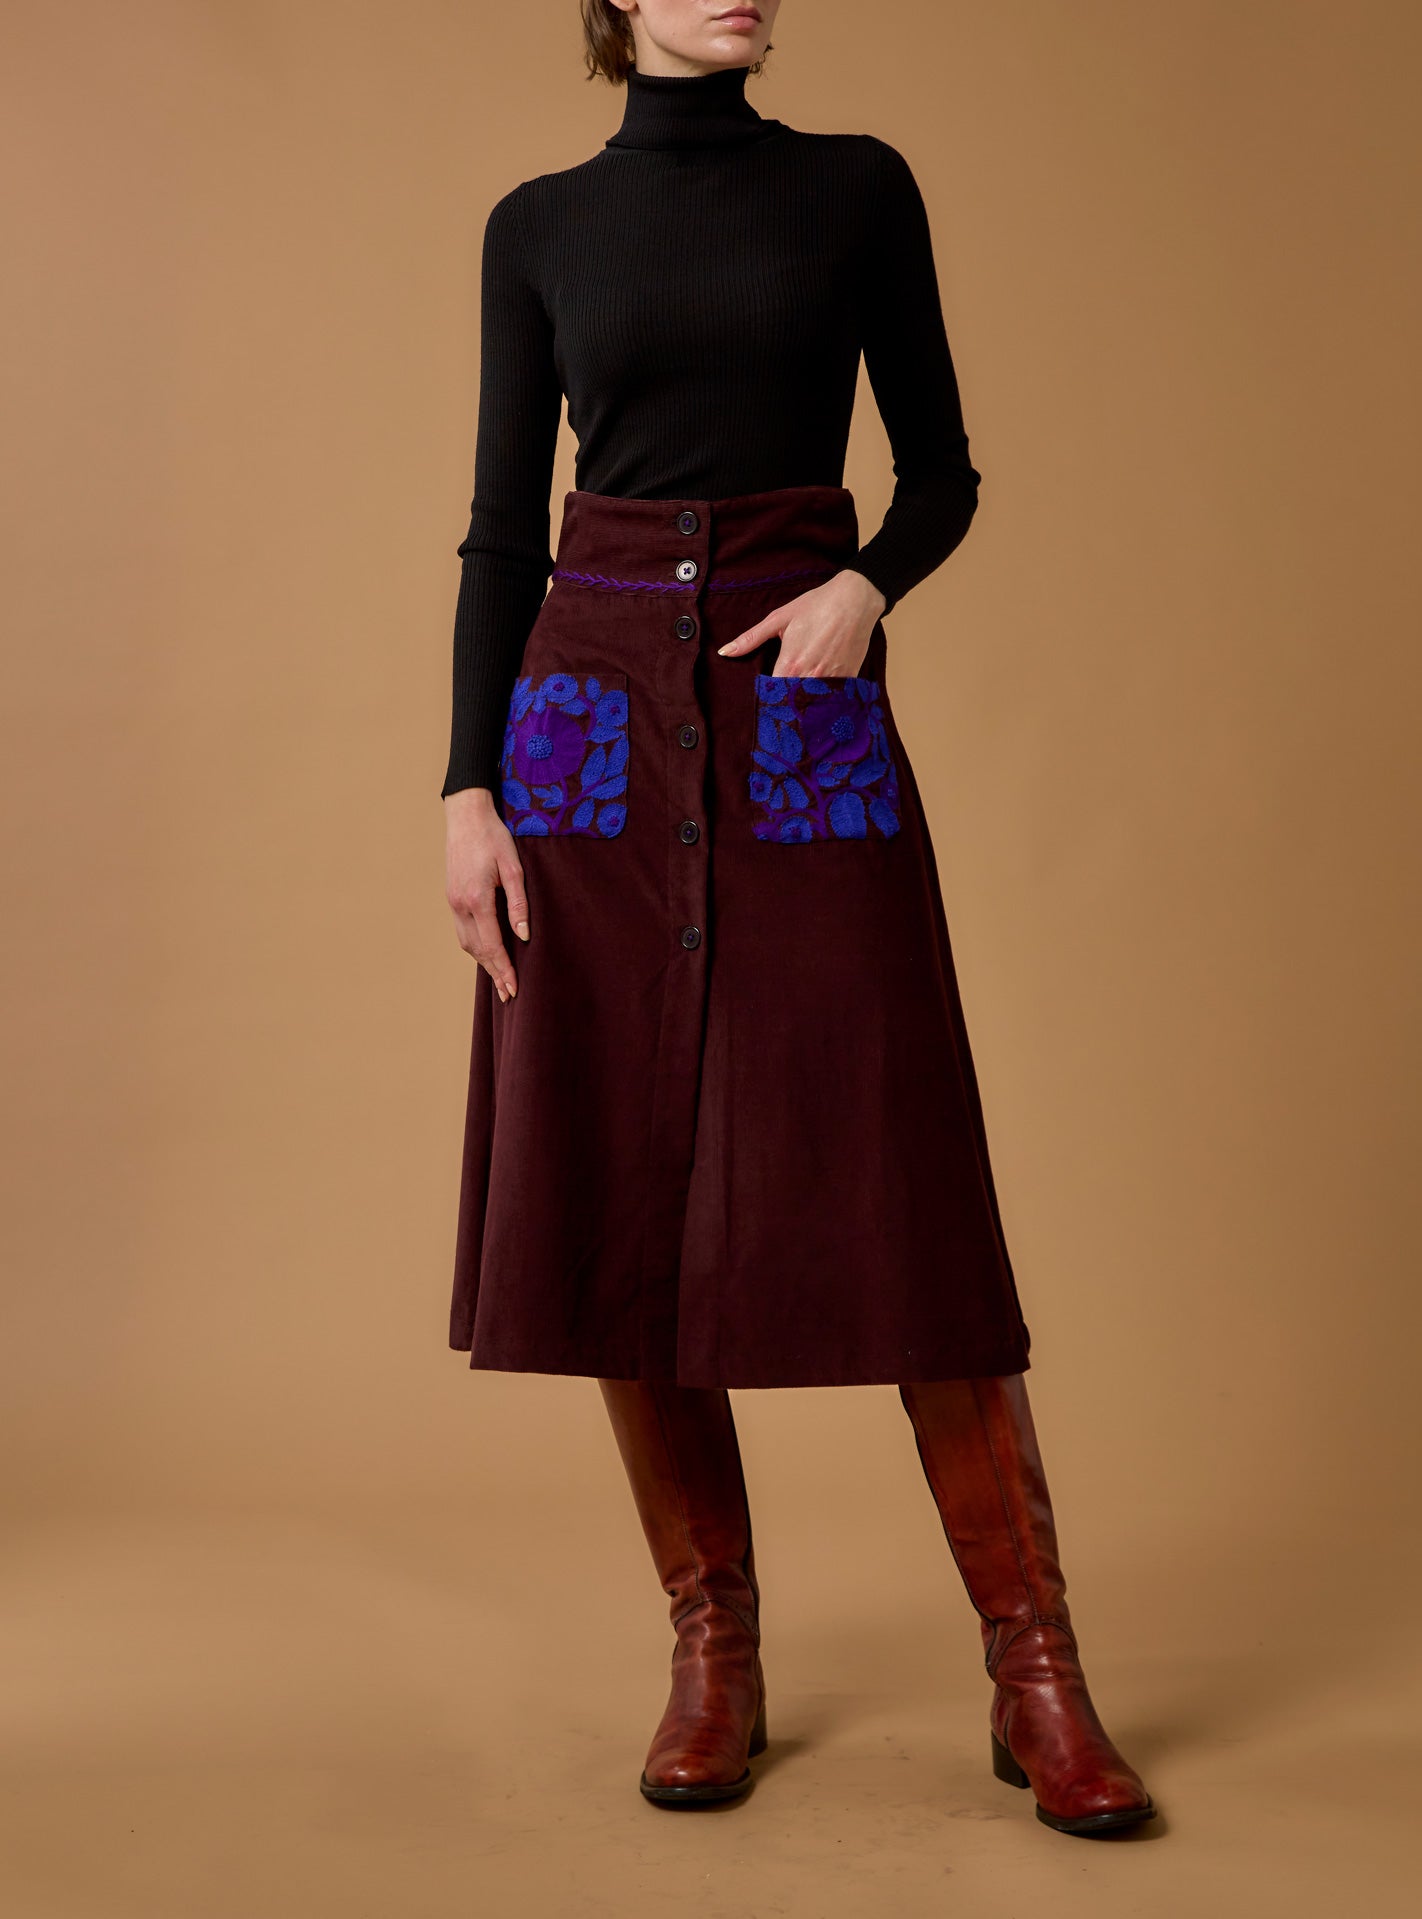 Large view of Yardley Chocolate/Cobalt & Purple Skirt - Embroidered Corduroy by Thierry Colson